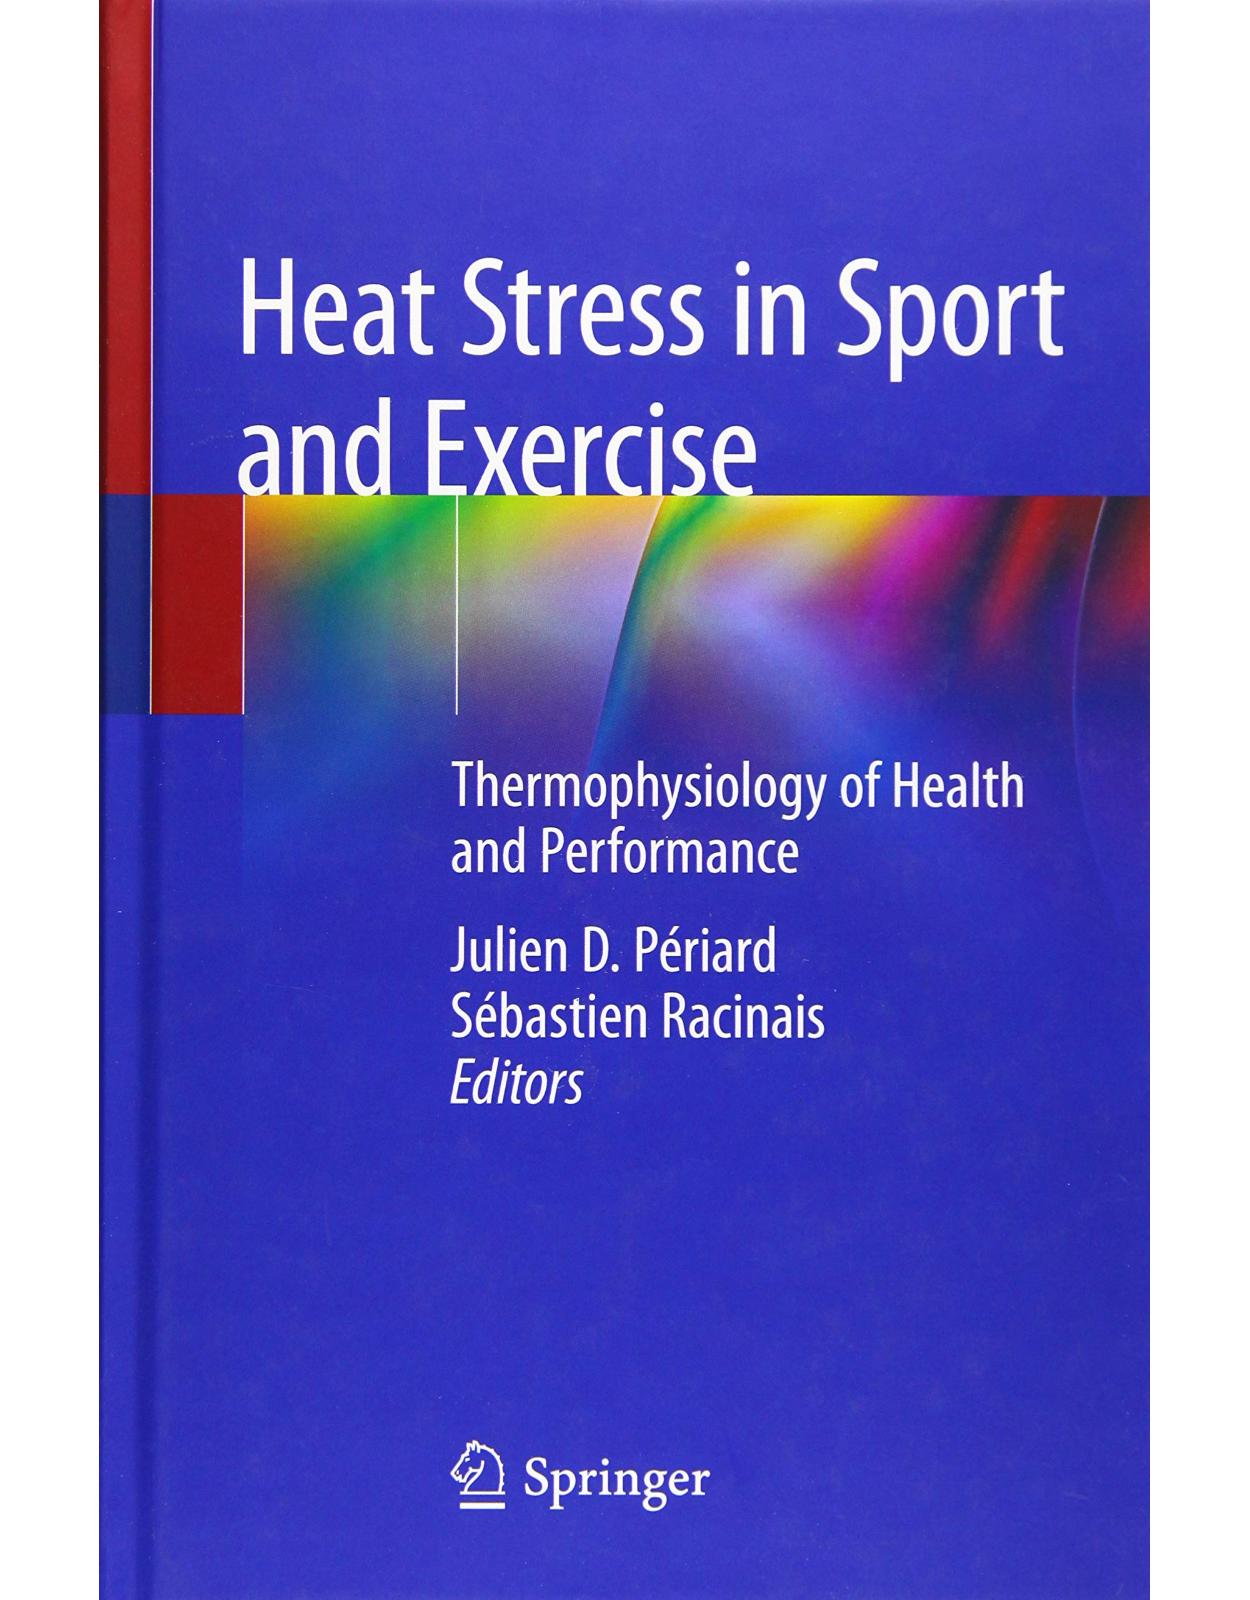 Heat Stress in Sport and Exercise. Thermophysiology of Health and Performance